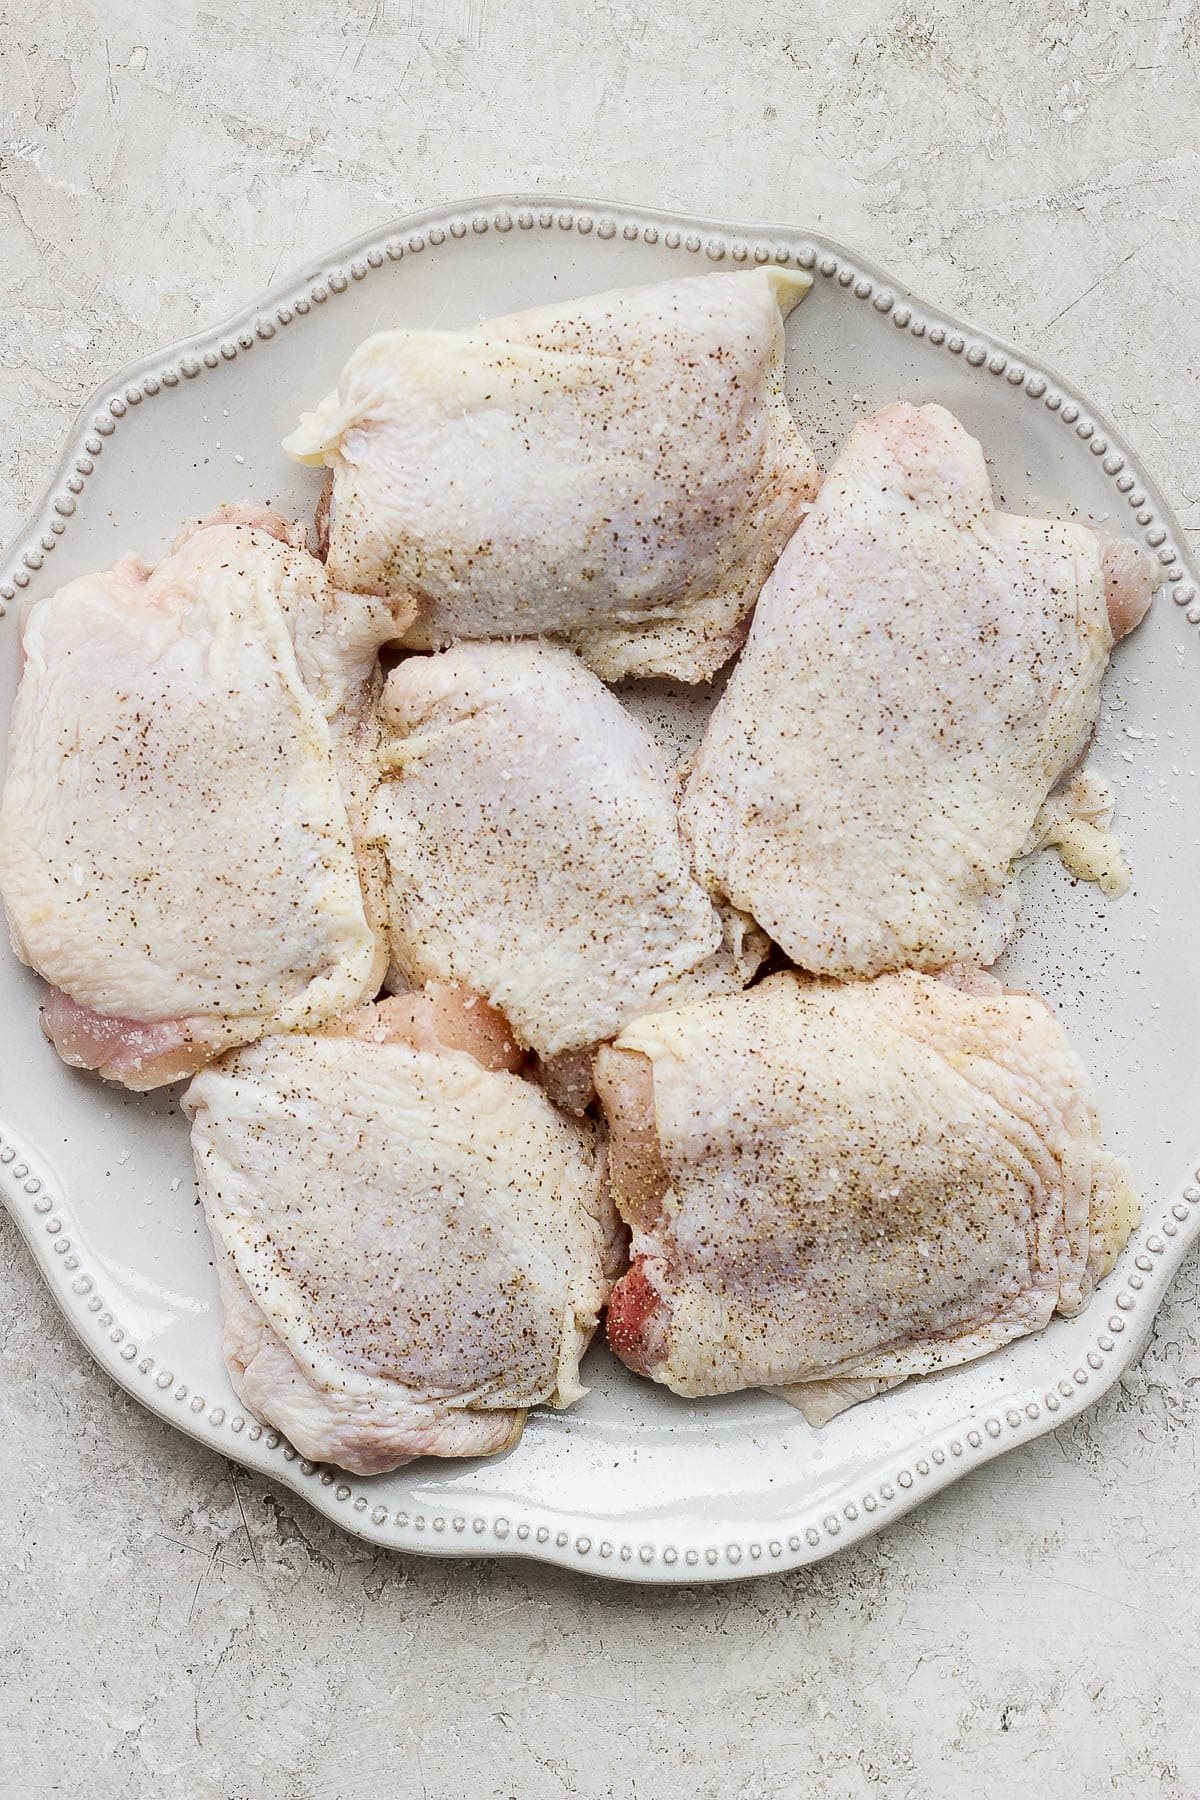 Raw chicken thighs seasoned with salt and pepper on a large plate.